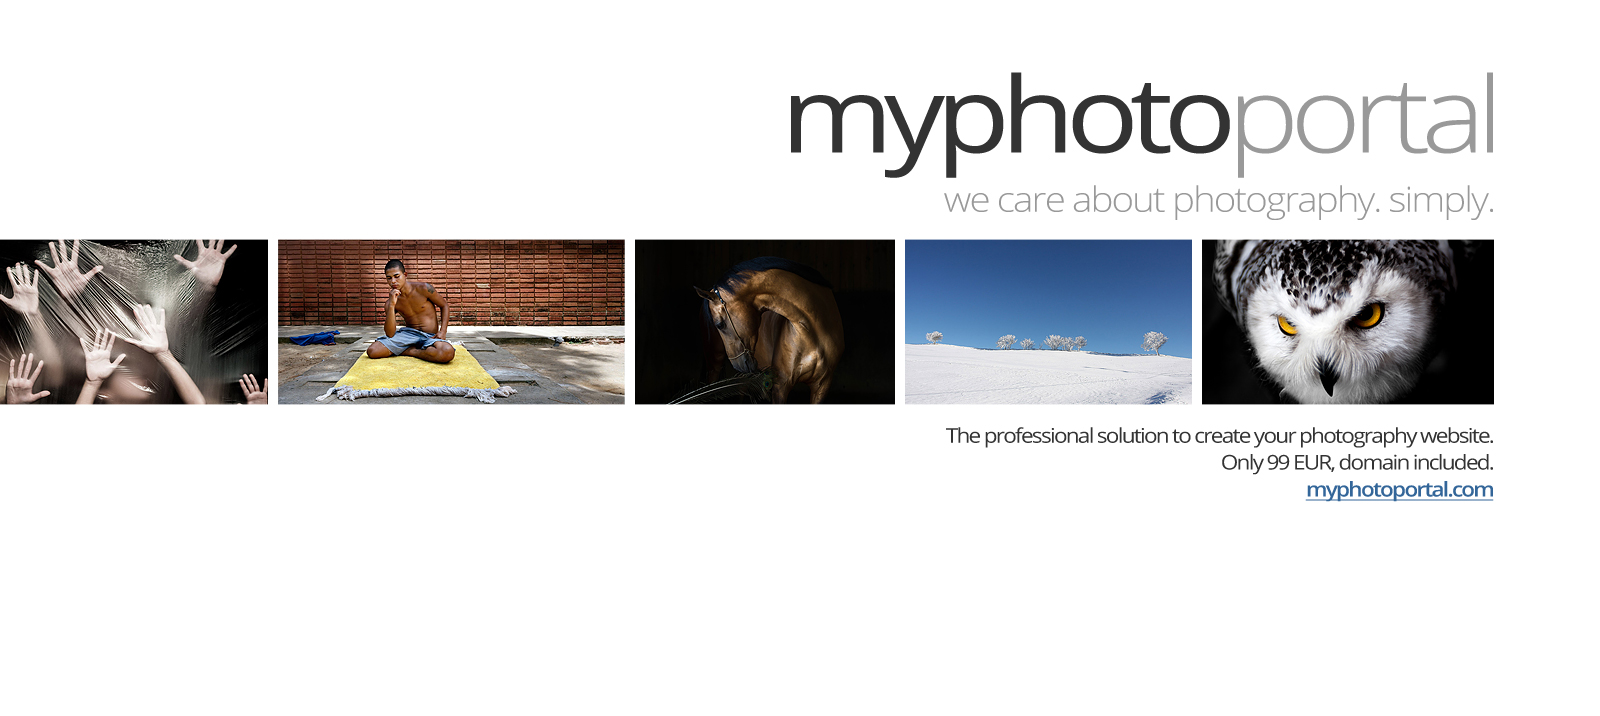 Myphotoportal.com - we care about photography. simply.